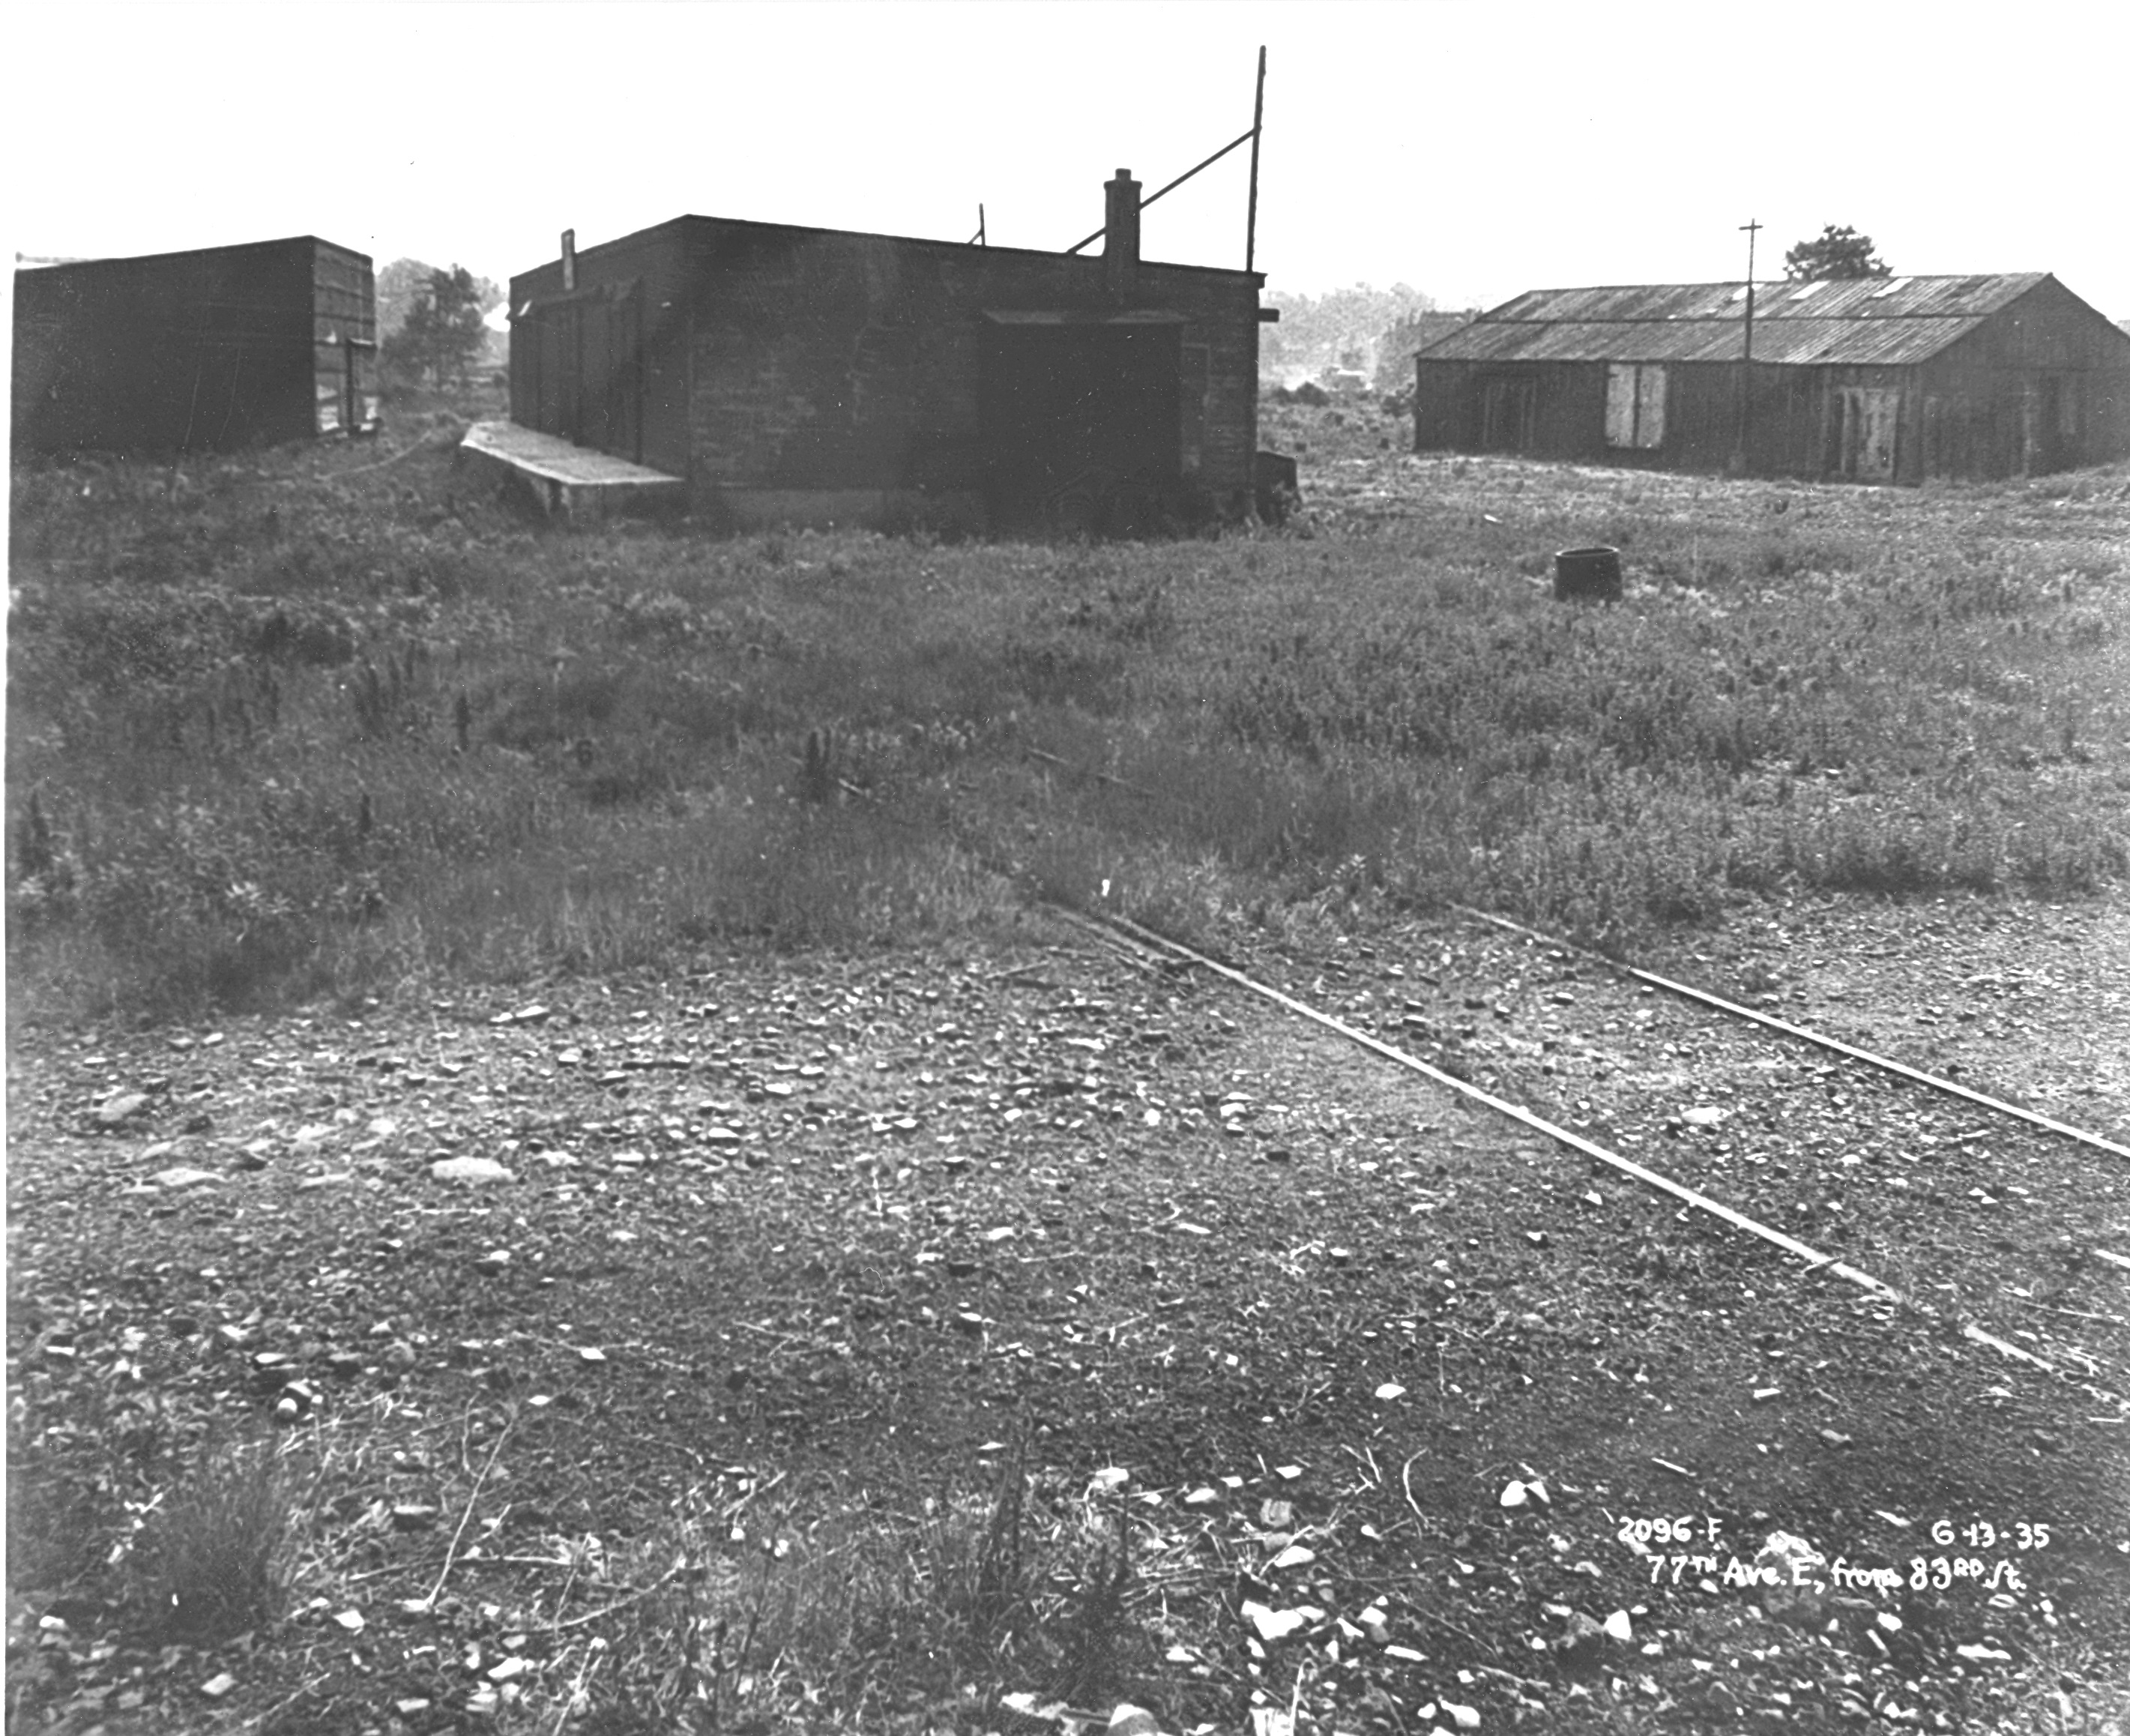 This photo shows 77th Avenue in eastern Glendale in the mid-1930s, just as the area was being developed from farmland into a residential community.